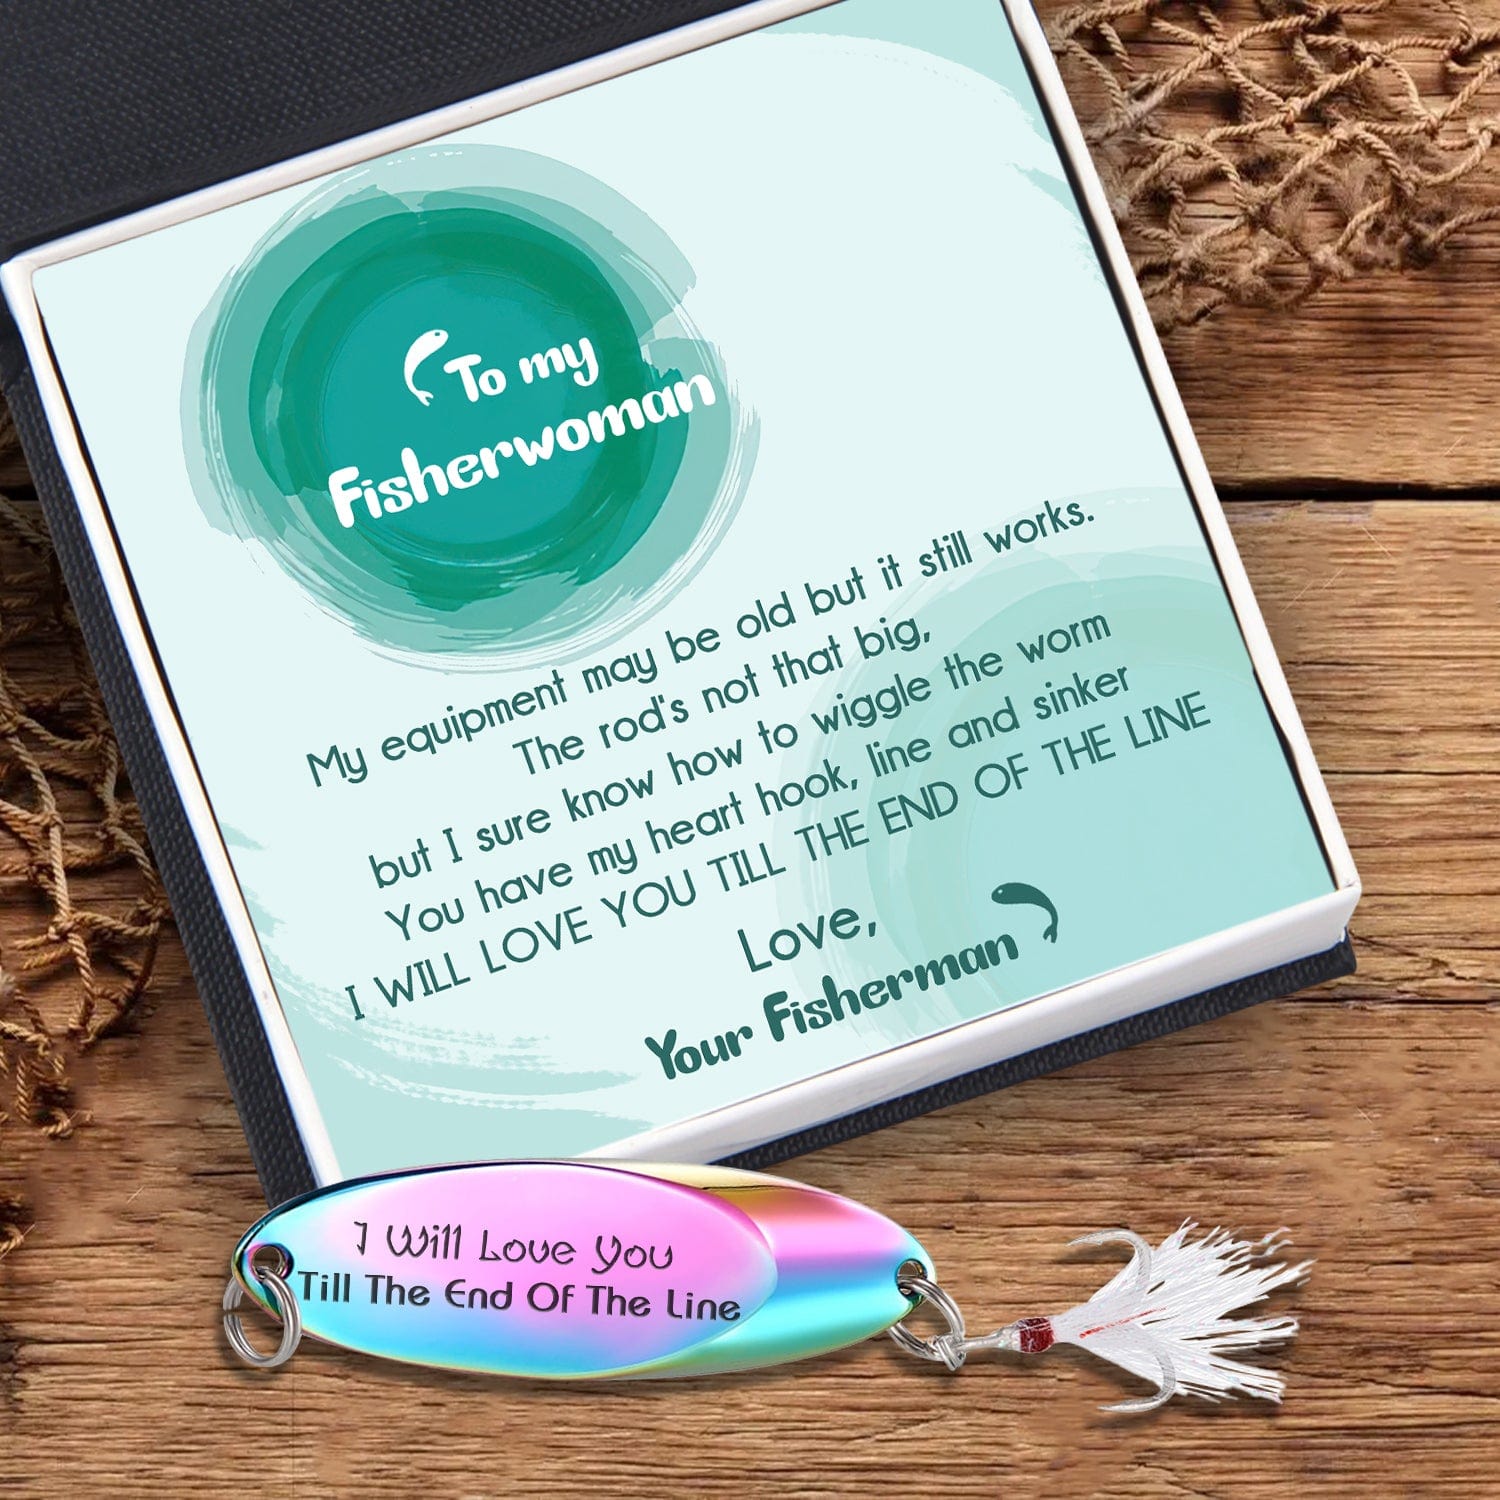 Sequin Fishing Bait - Fishing - To My Fisherwomen - I Will Love You Till The End Of The Line - Gfab13001